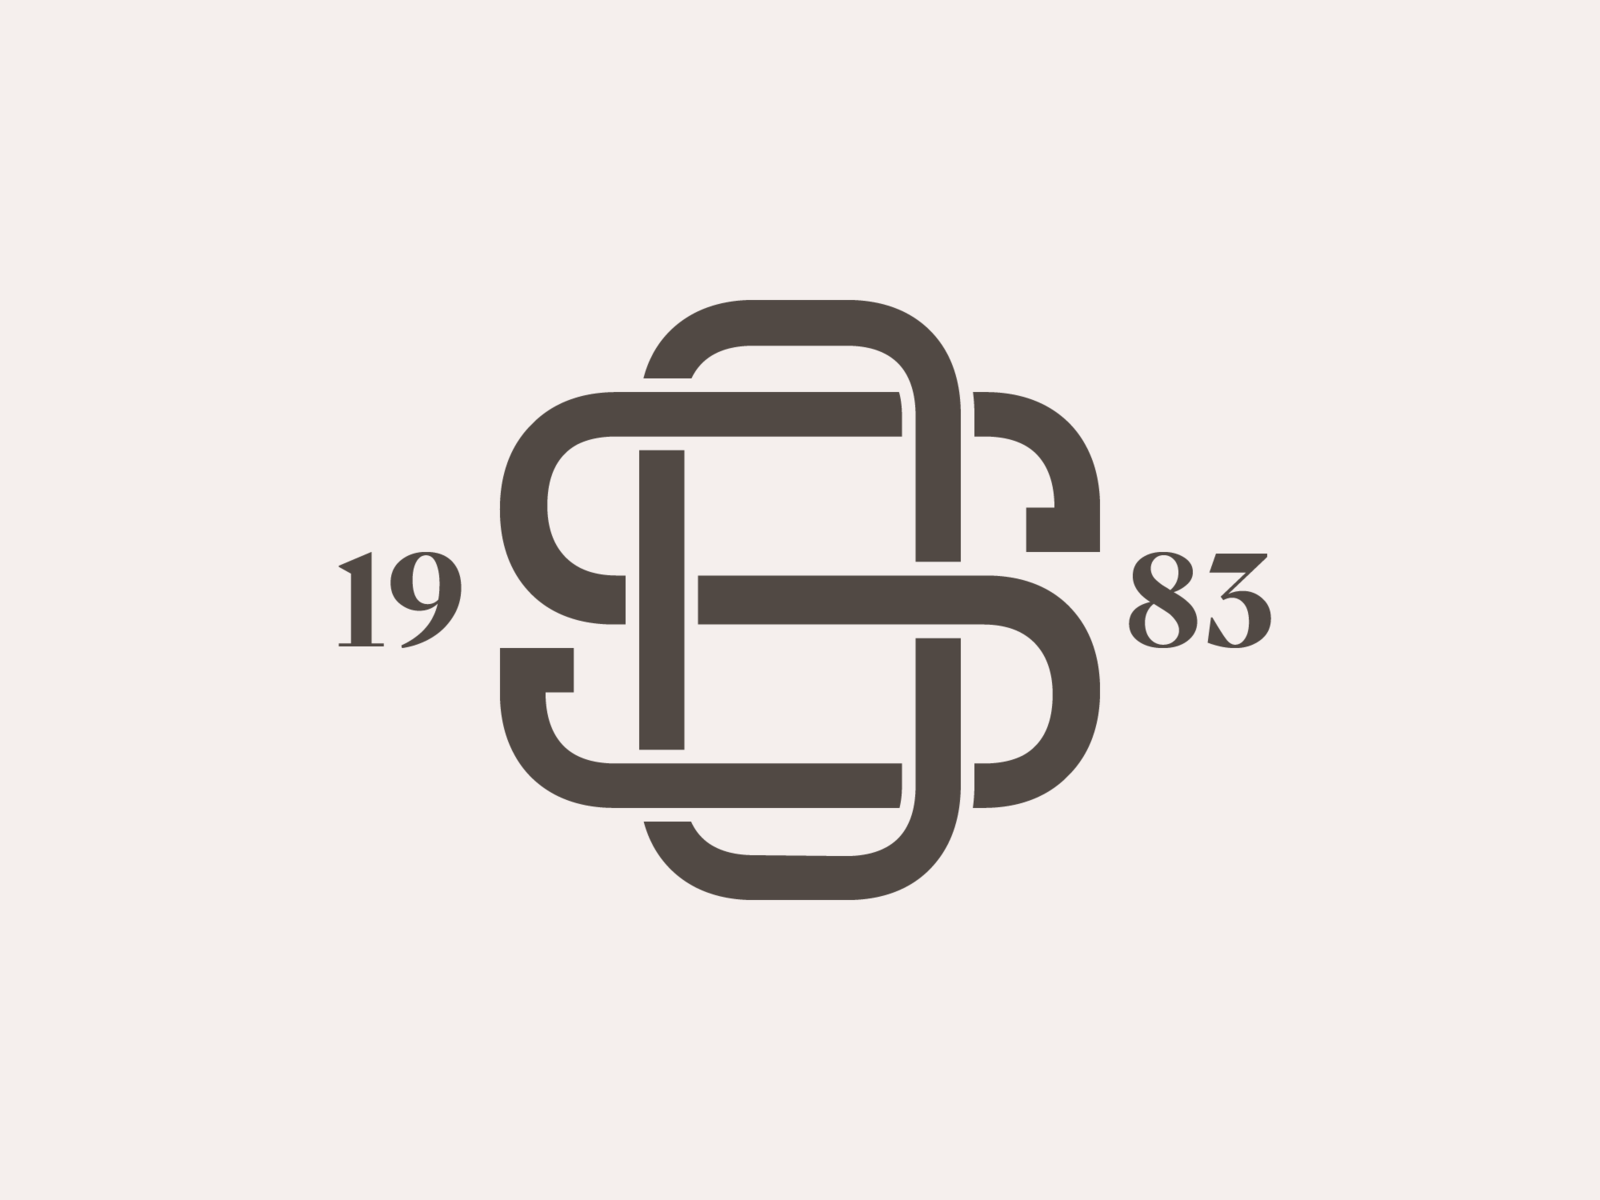 S O 19 By Rolo Carrasco On Dribbble